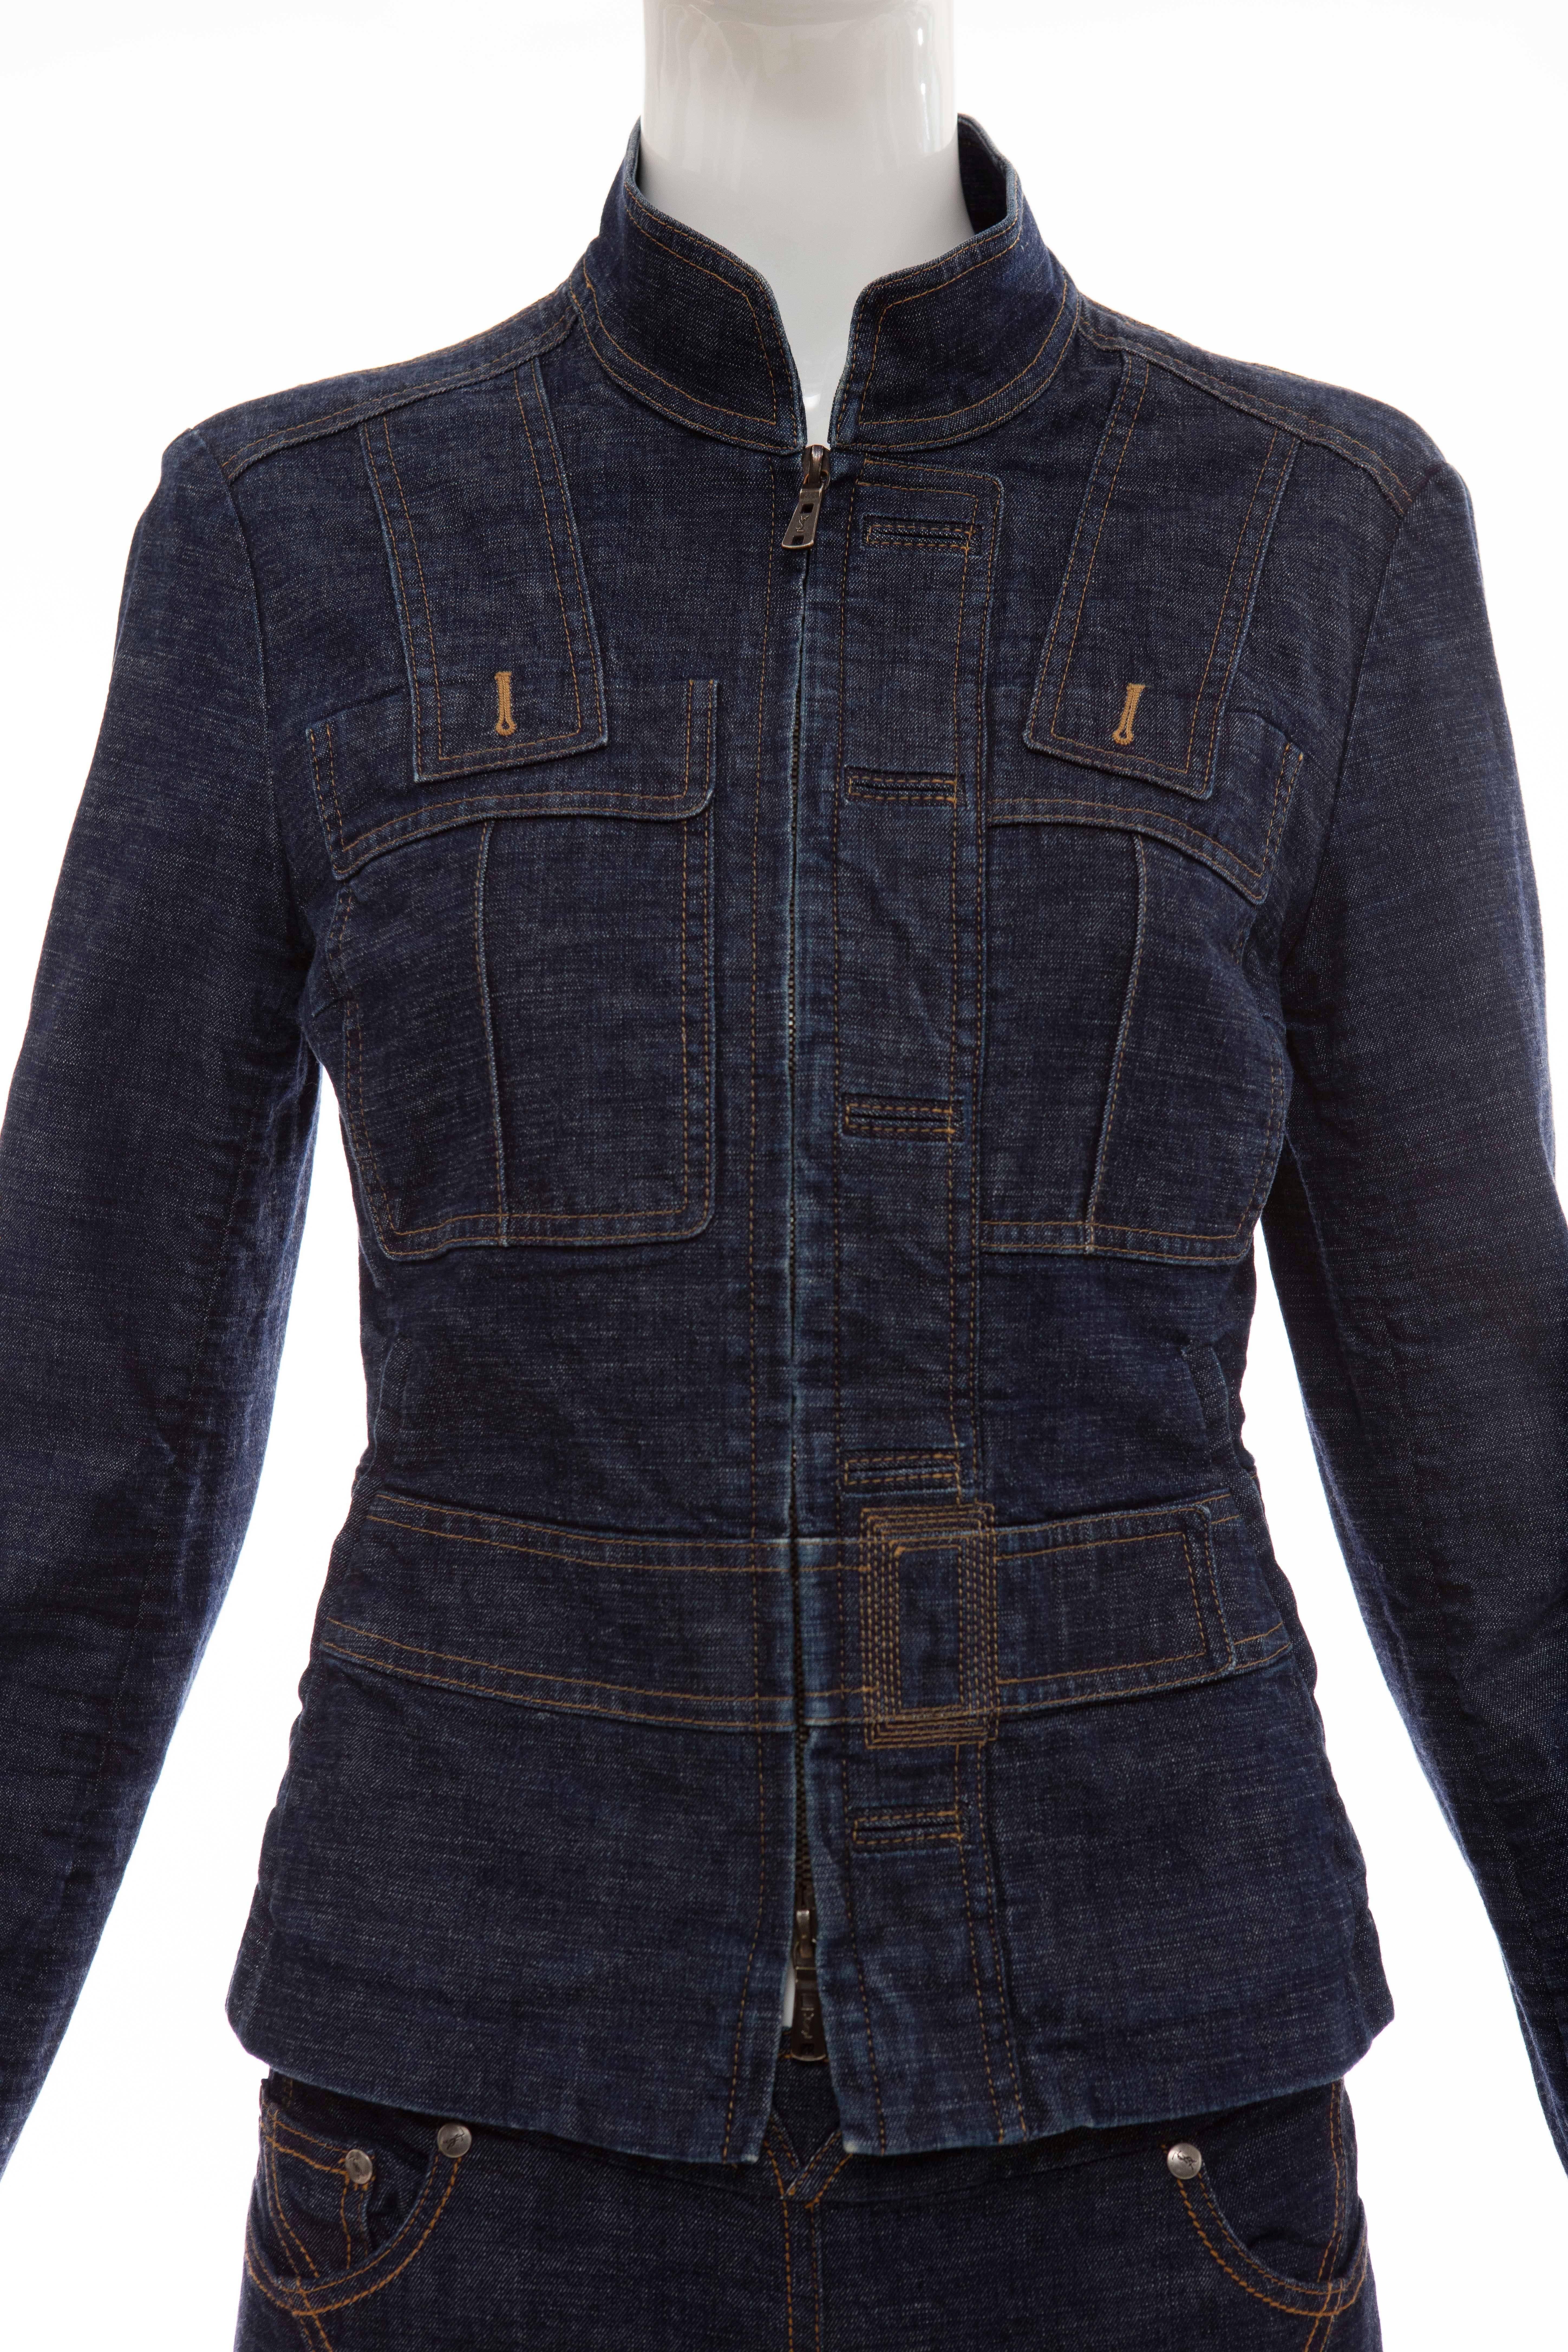 Tom Ford For Yves Saint Laurent Denim Pant Suit, Circa 2003  For Sale 1